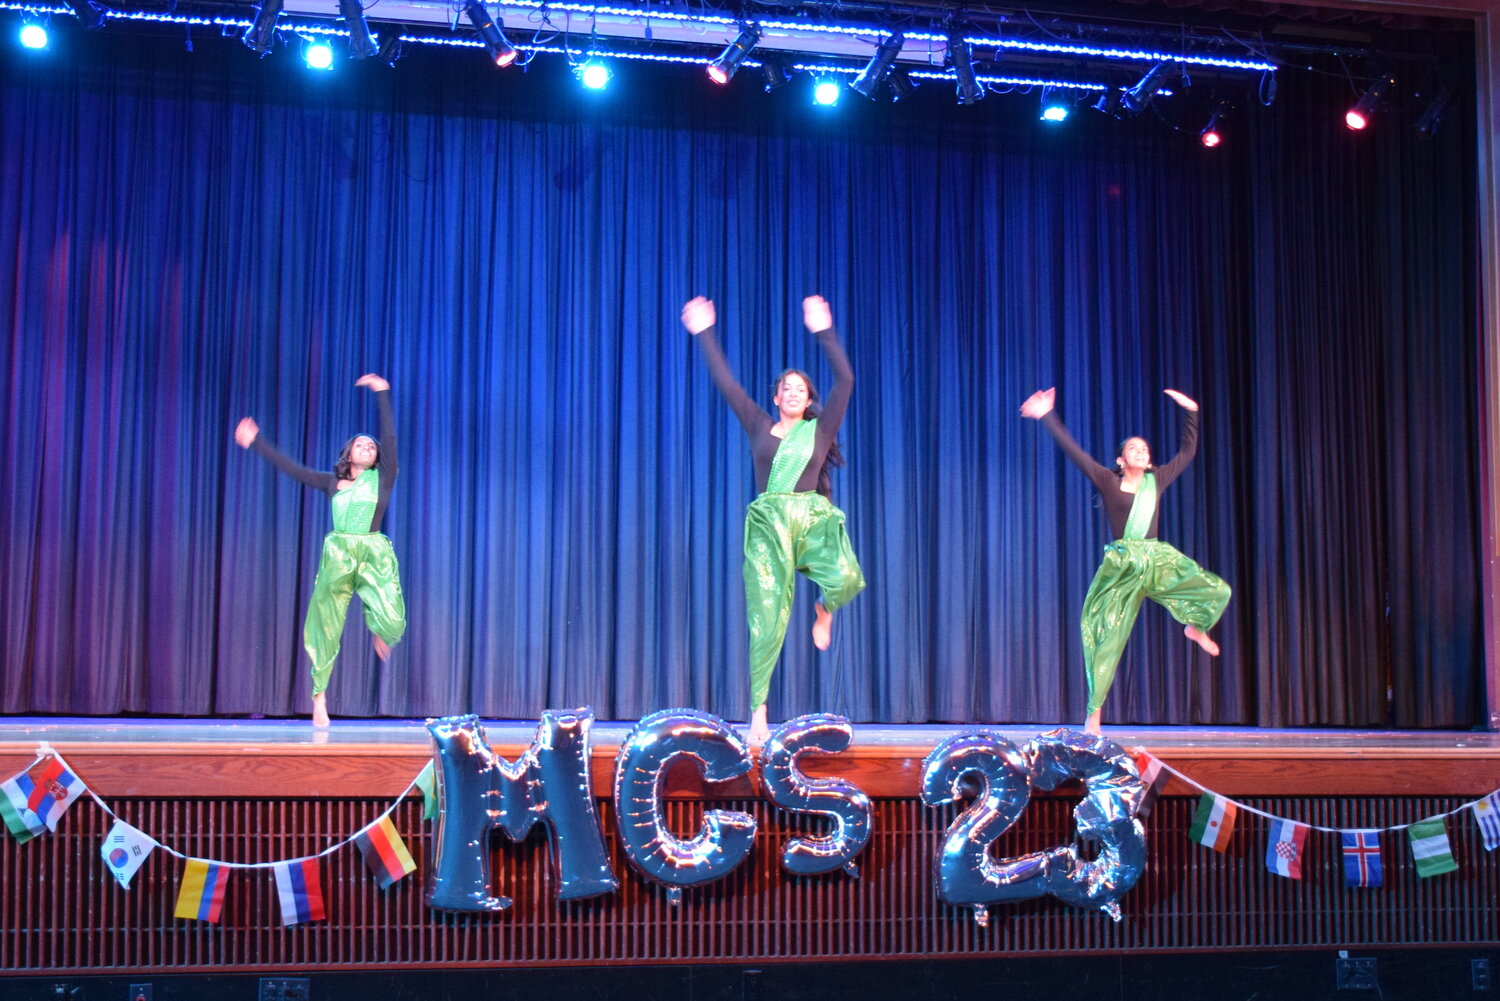 East Meadow High School’s Multicultural Club hosted a Multicultural Show on April 20